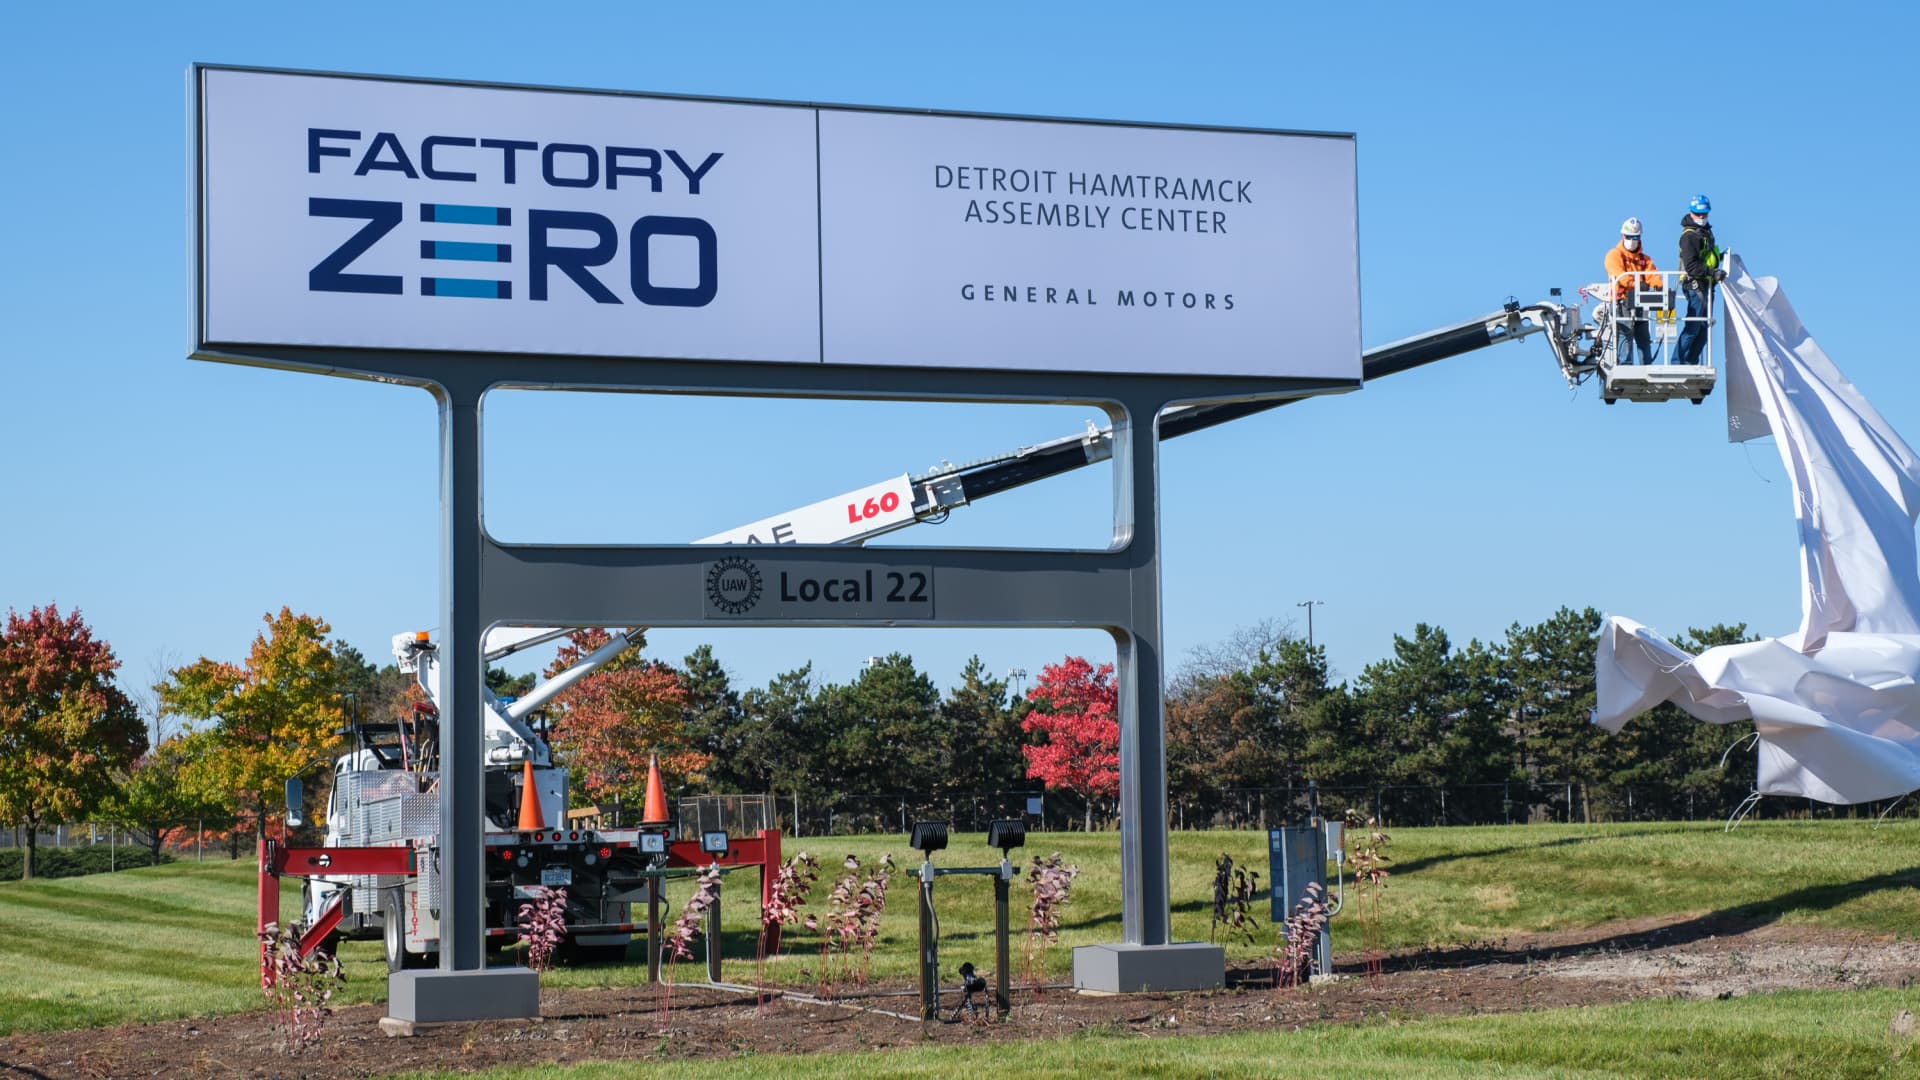 A sign is unveiled at General Motors Detroit-Hamtramck Assembly on Oct. 16, 2020, introducing the facility's new name: Factory Zero, Detroit-Hamtramck Assembly Center.